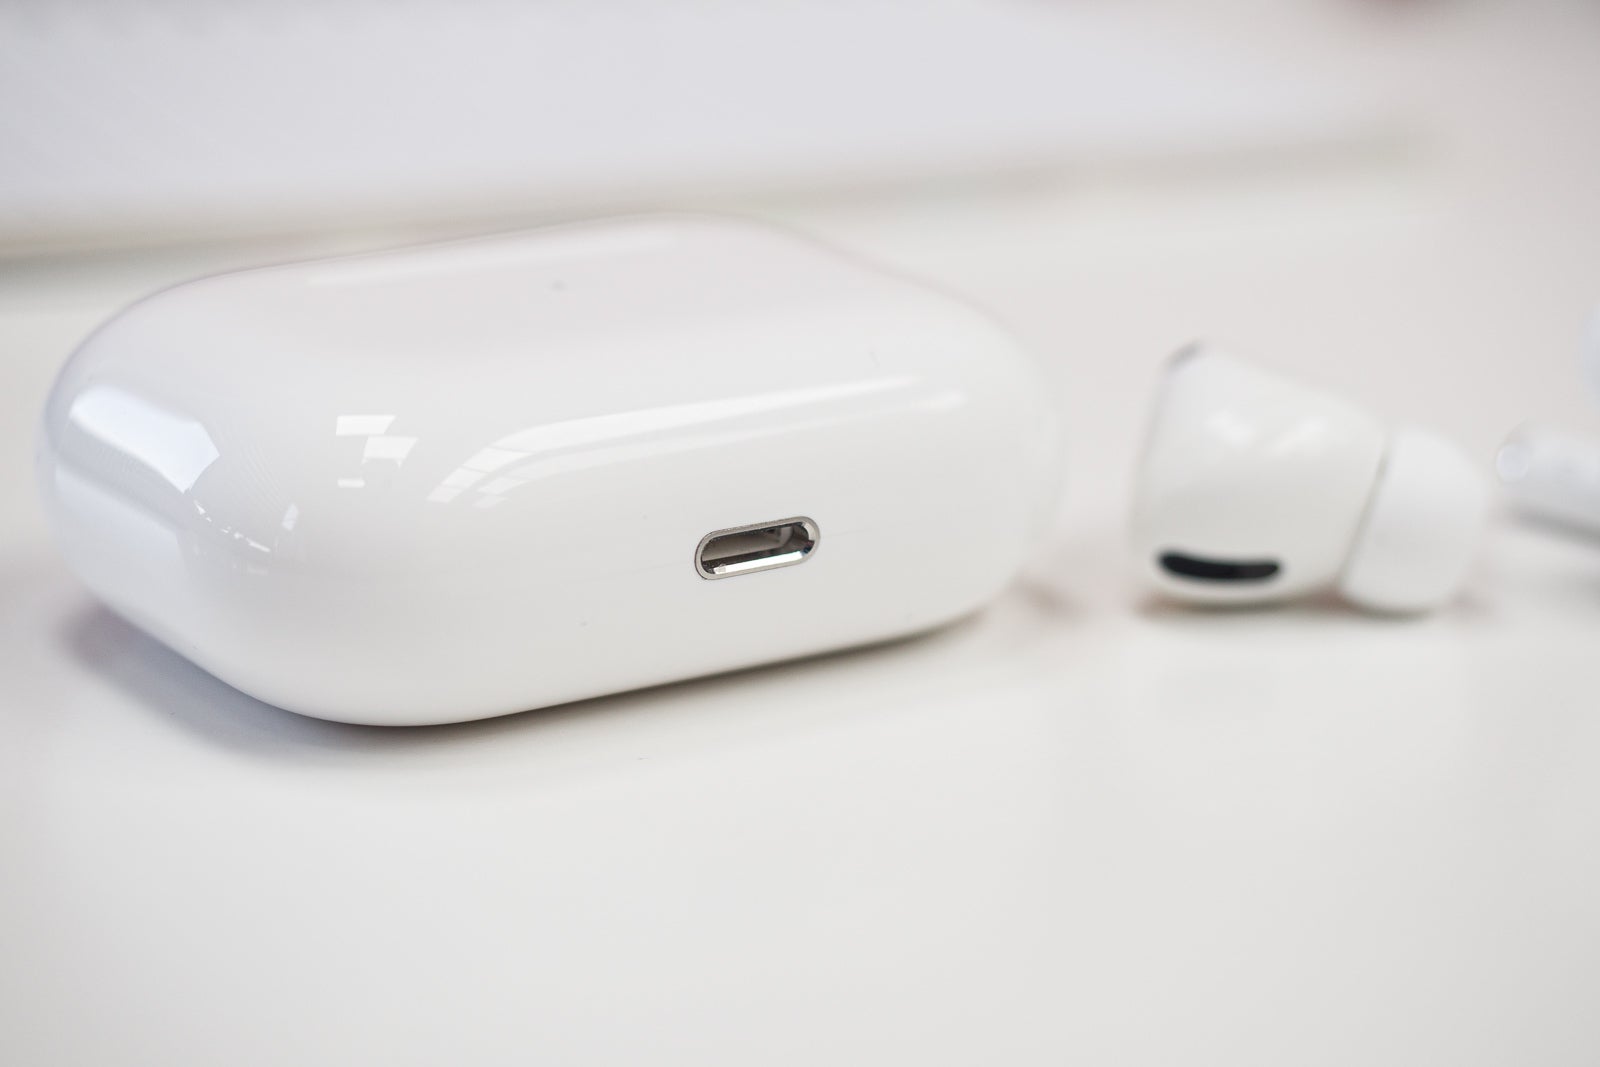 The AirPods Pro case (shown here) charges via Lightning, while the Buds Live case uses USB Type-C - Galaxy Buds Pro vs AirPods Pro